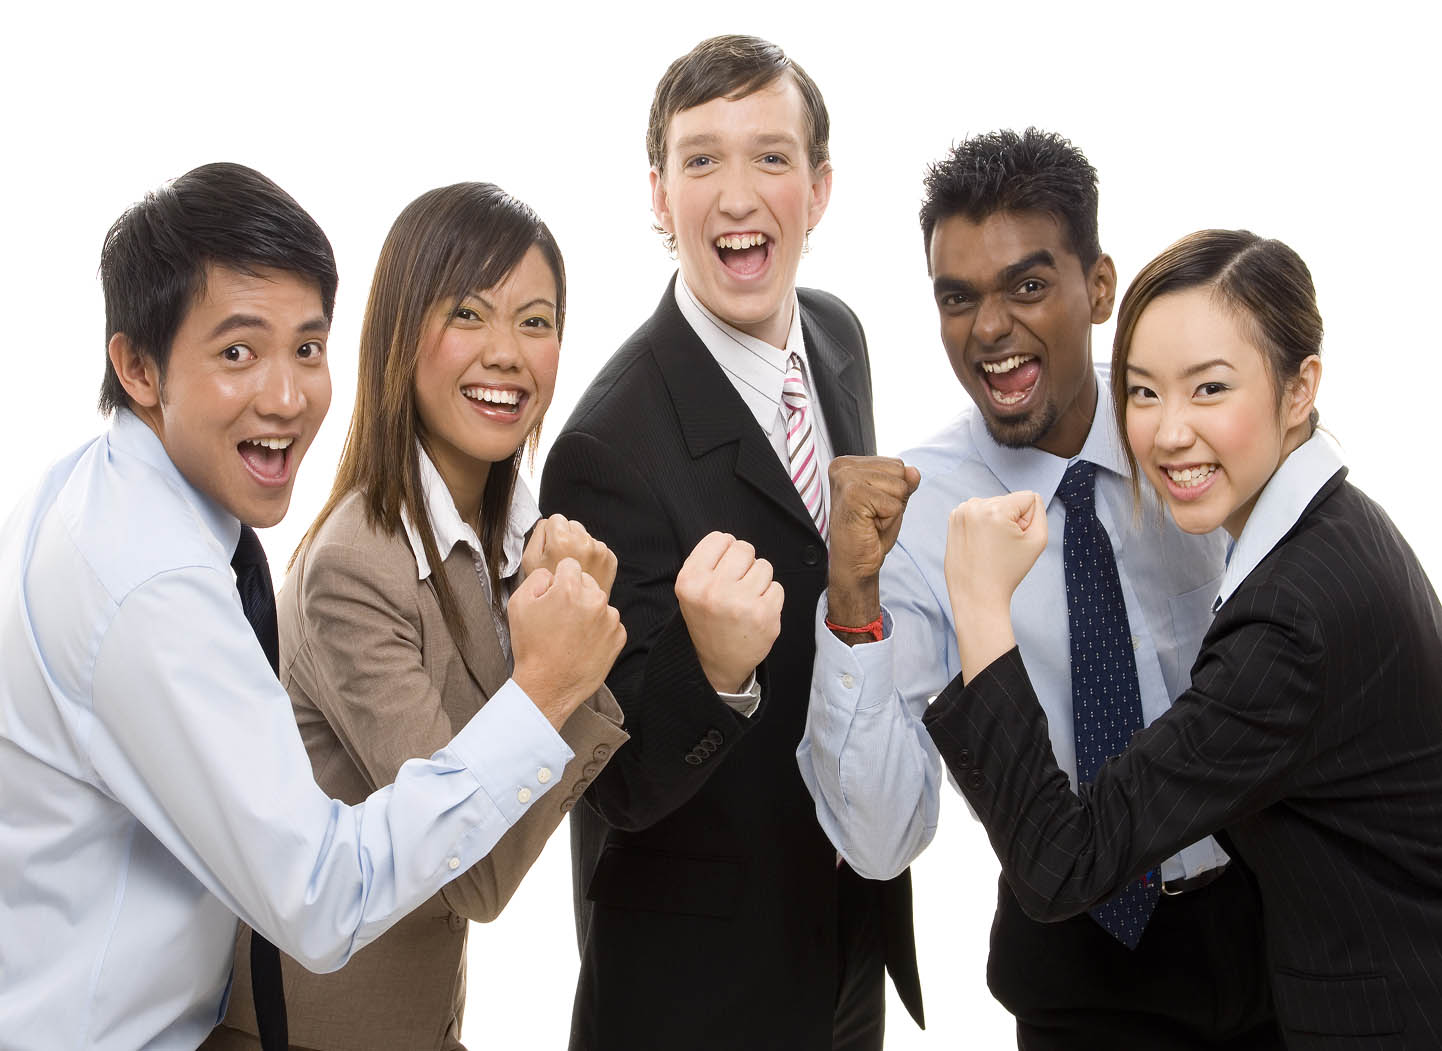 A group of business people celebrate their team success